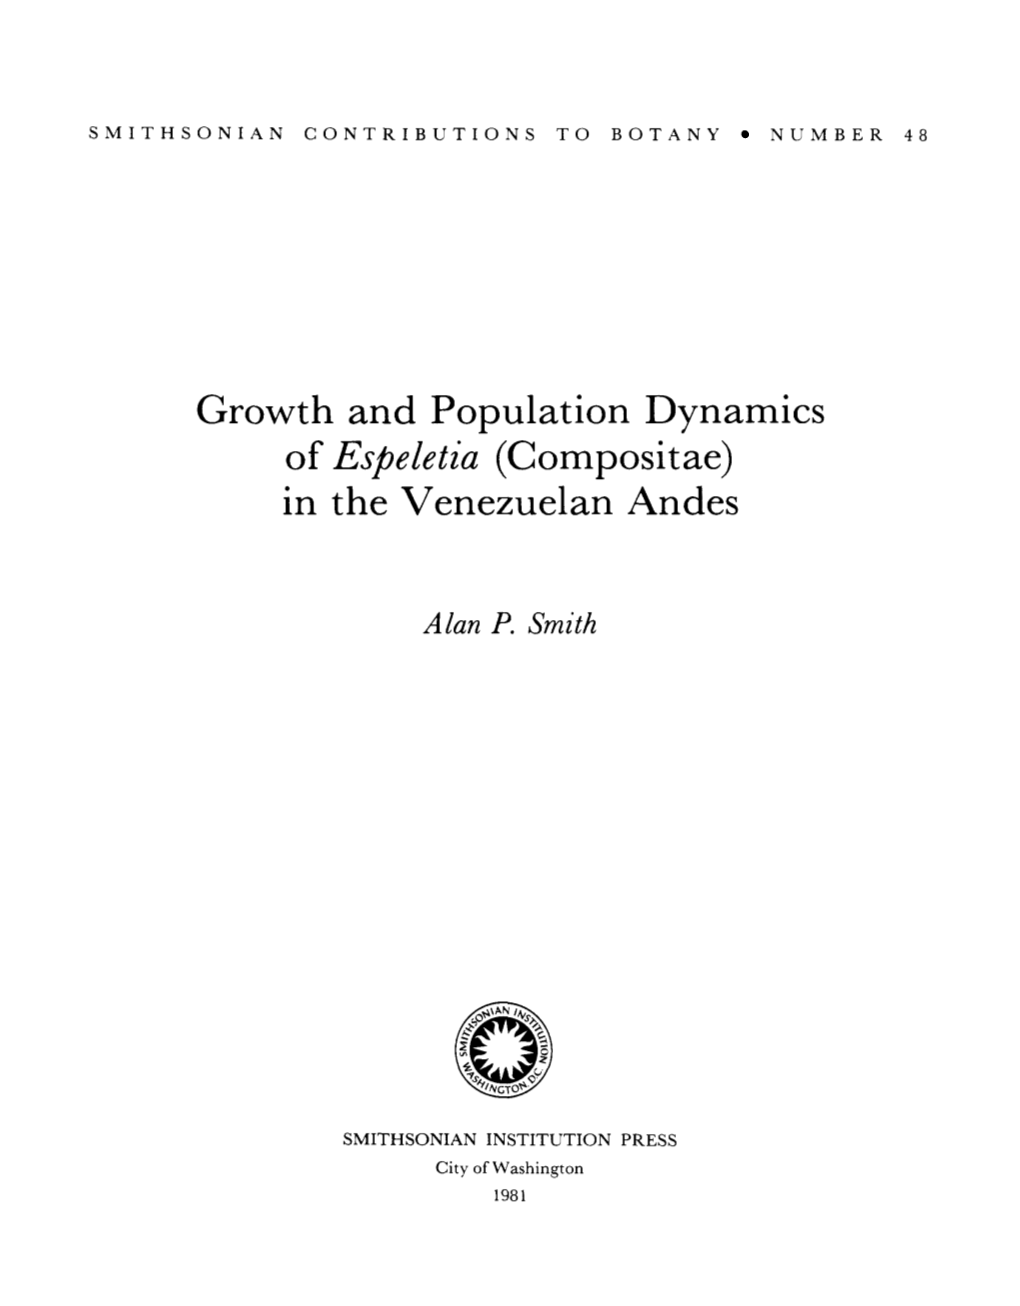 Growth and Population Dynamics of Espeletia (Compositae) in the Venezuelan Andes